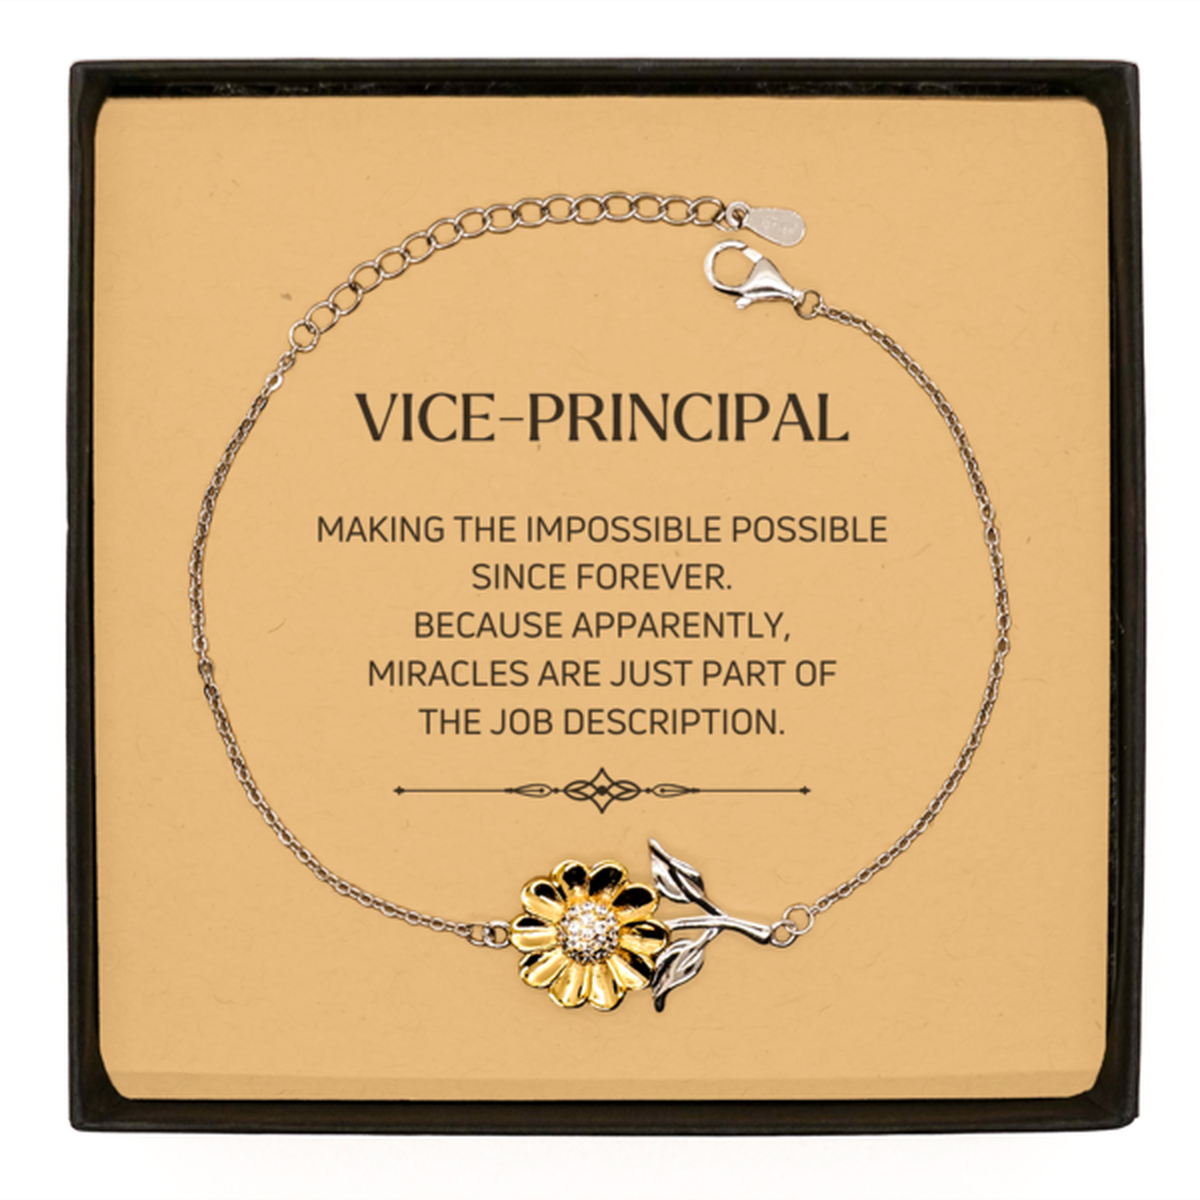 Funny Vice-principal Gifts, Miracles are just part of the job description, Inspirational Birthday Sunflower Bracelet For Vice-principal, Men, Women, Coworkers, Friends, Boss